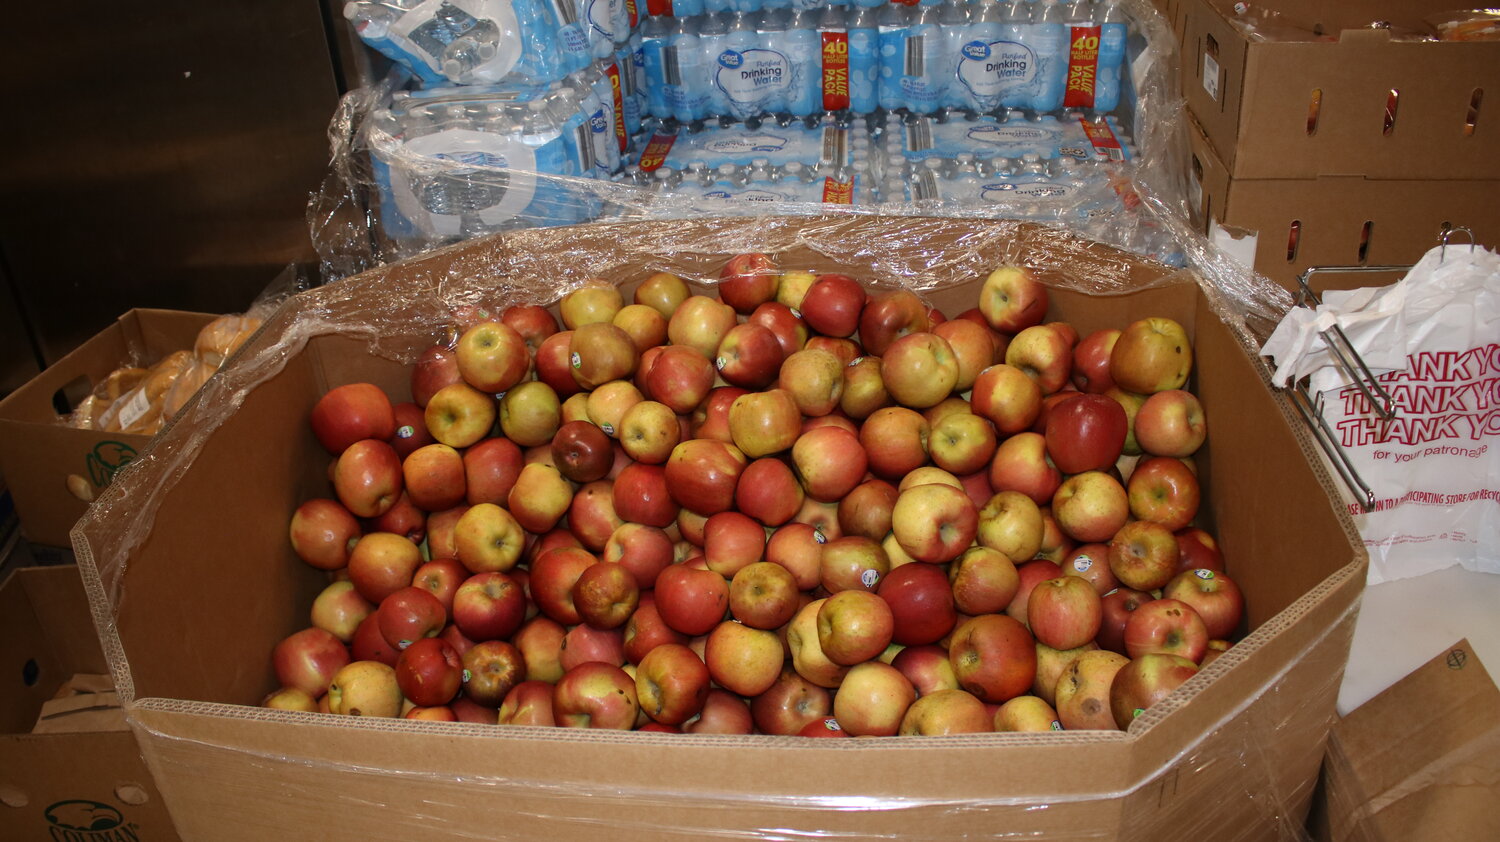 Apples await sorting into baskets that will in turn be given to residents in need of food assistance at Casa de Peregrinos emergency food pantry in Las Cruces in late July 2023.